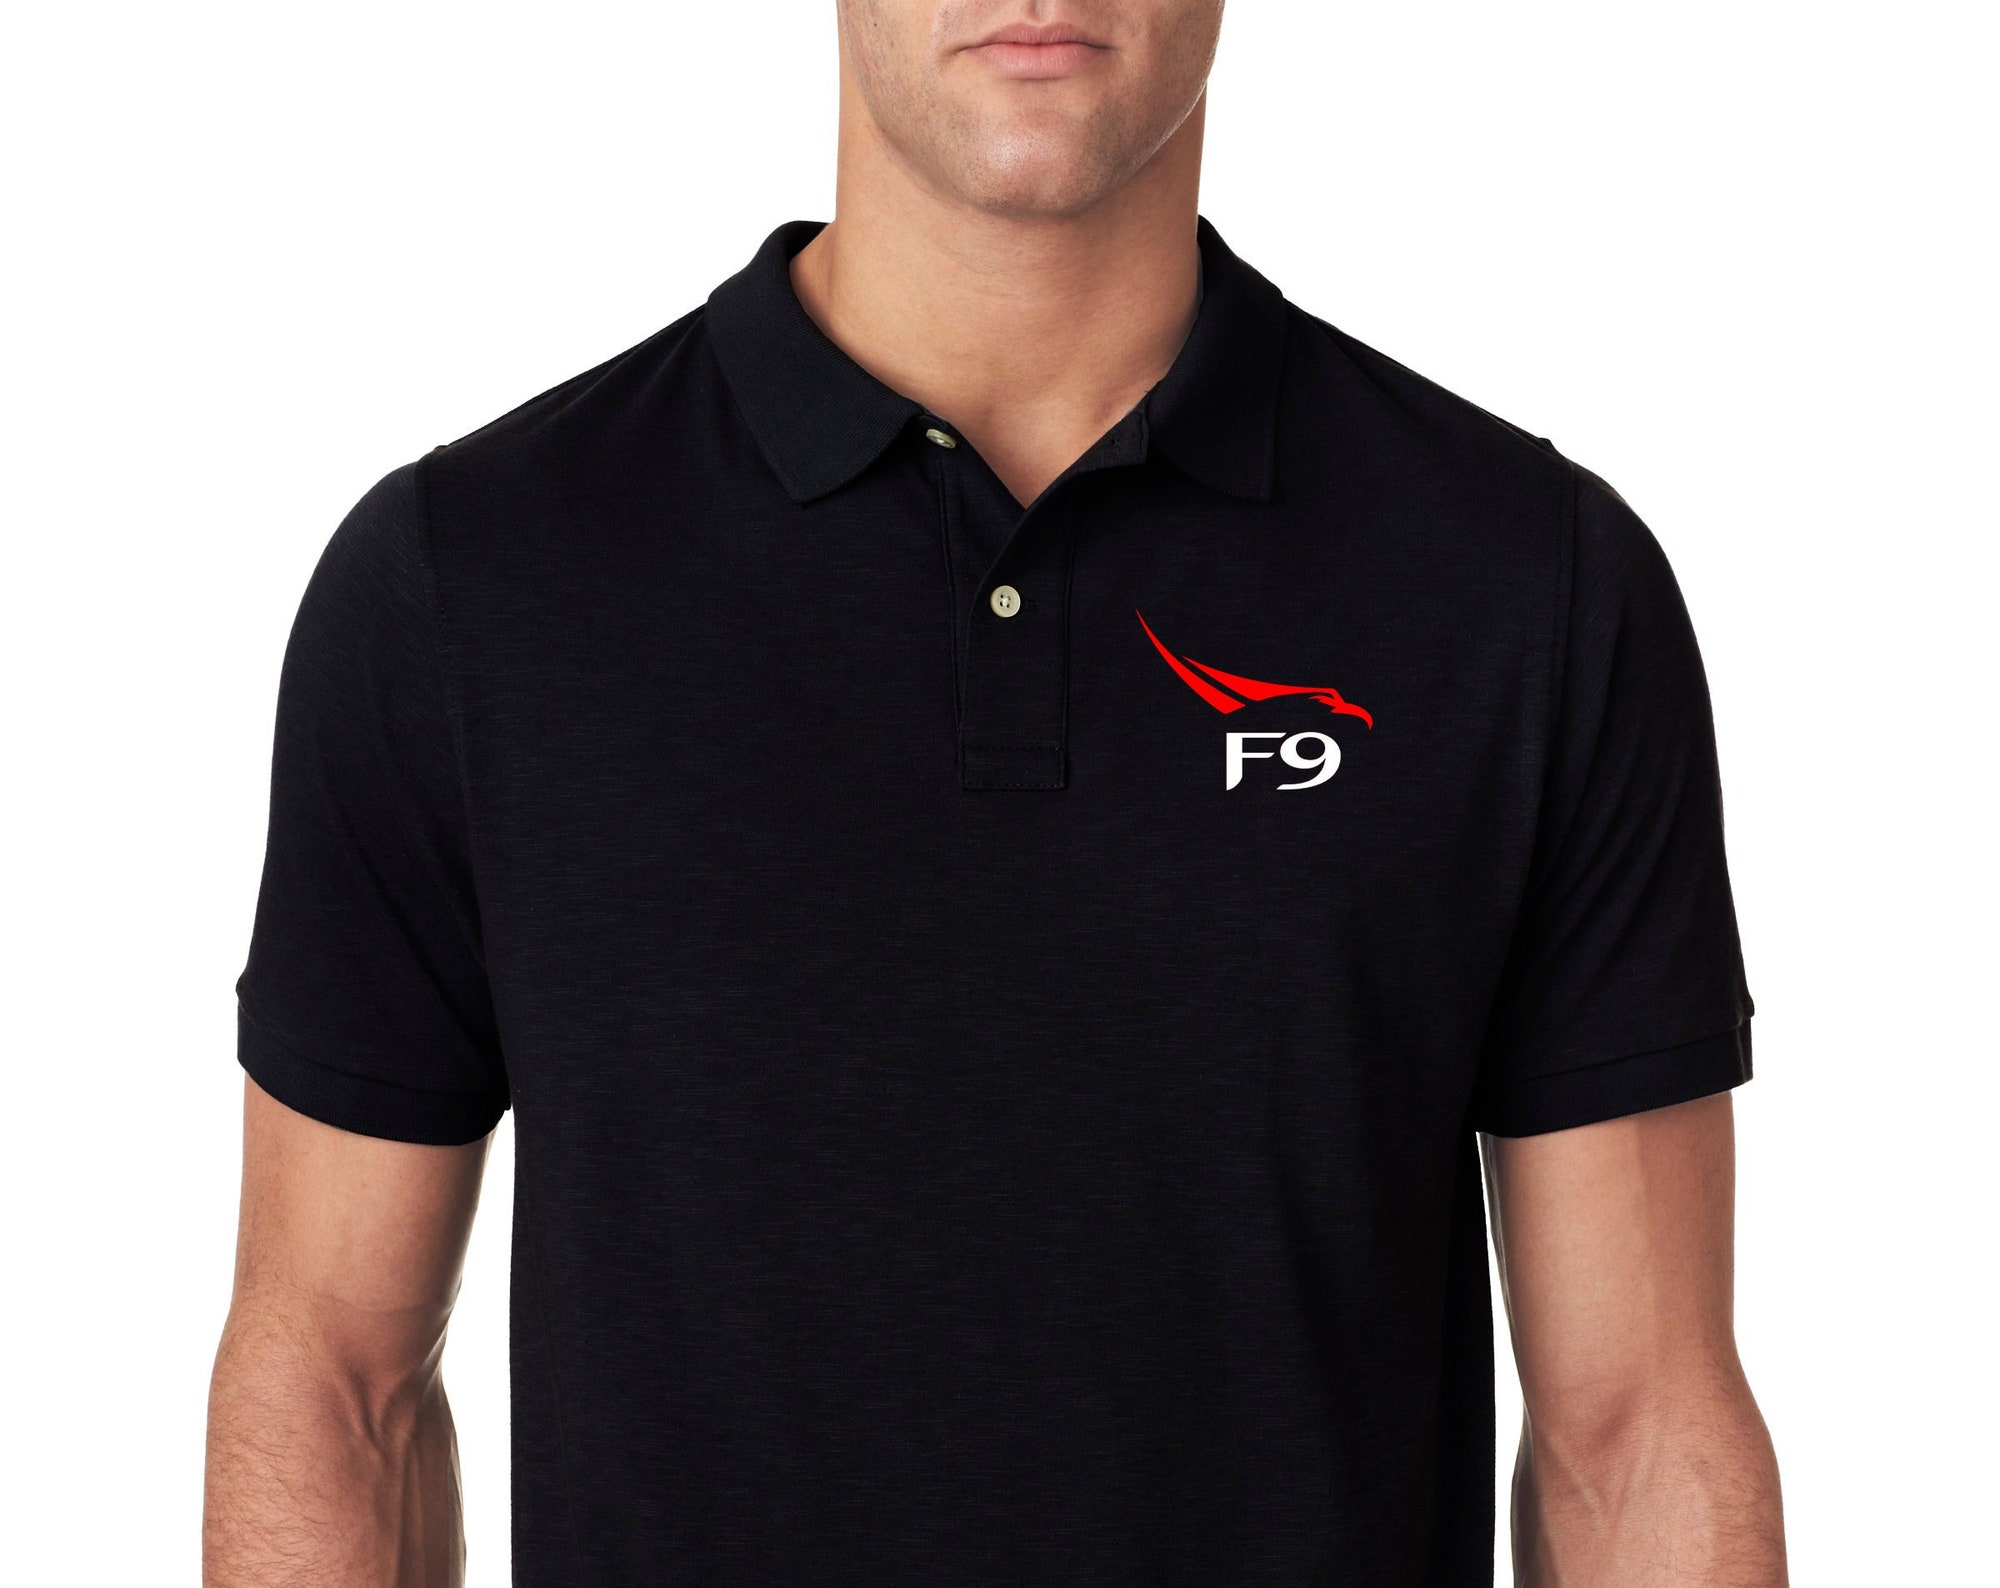 FALCON 9 F9 FH heavy spacex space x elon musk tesla rocket Embroidered Polo Shirt